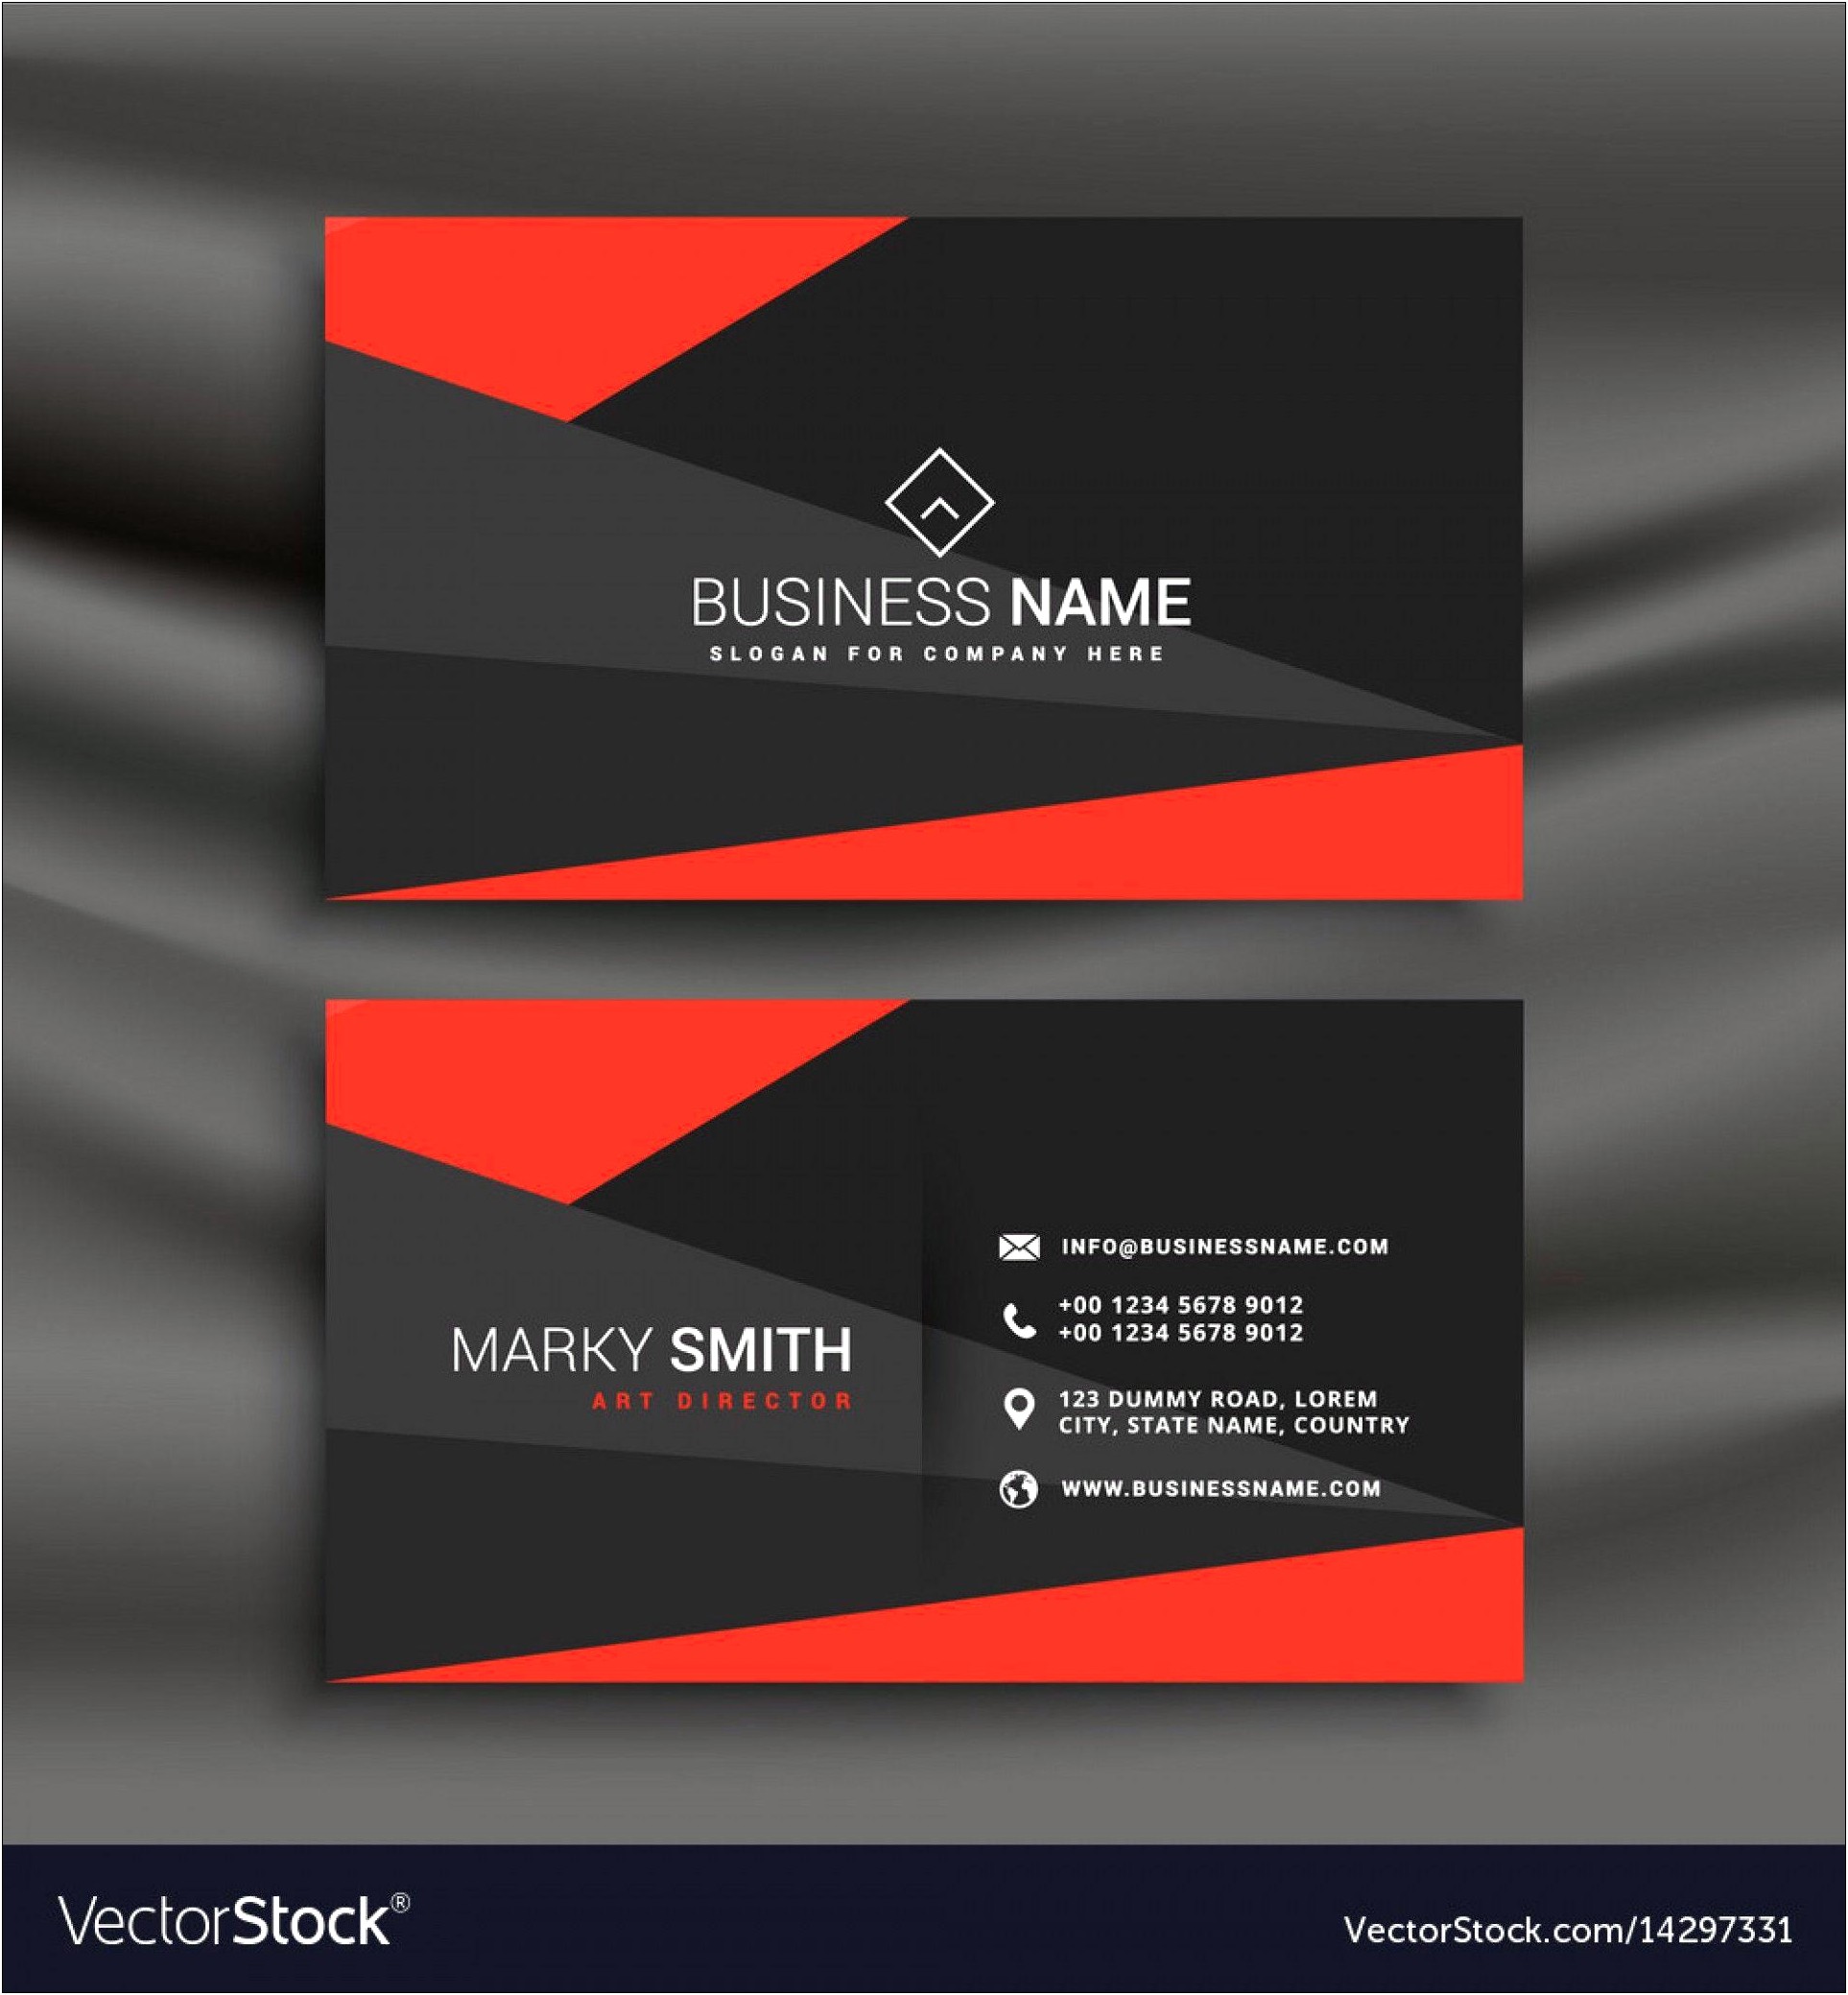 Download Avery Business Card Template 5371